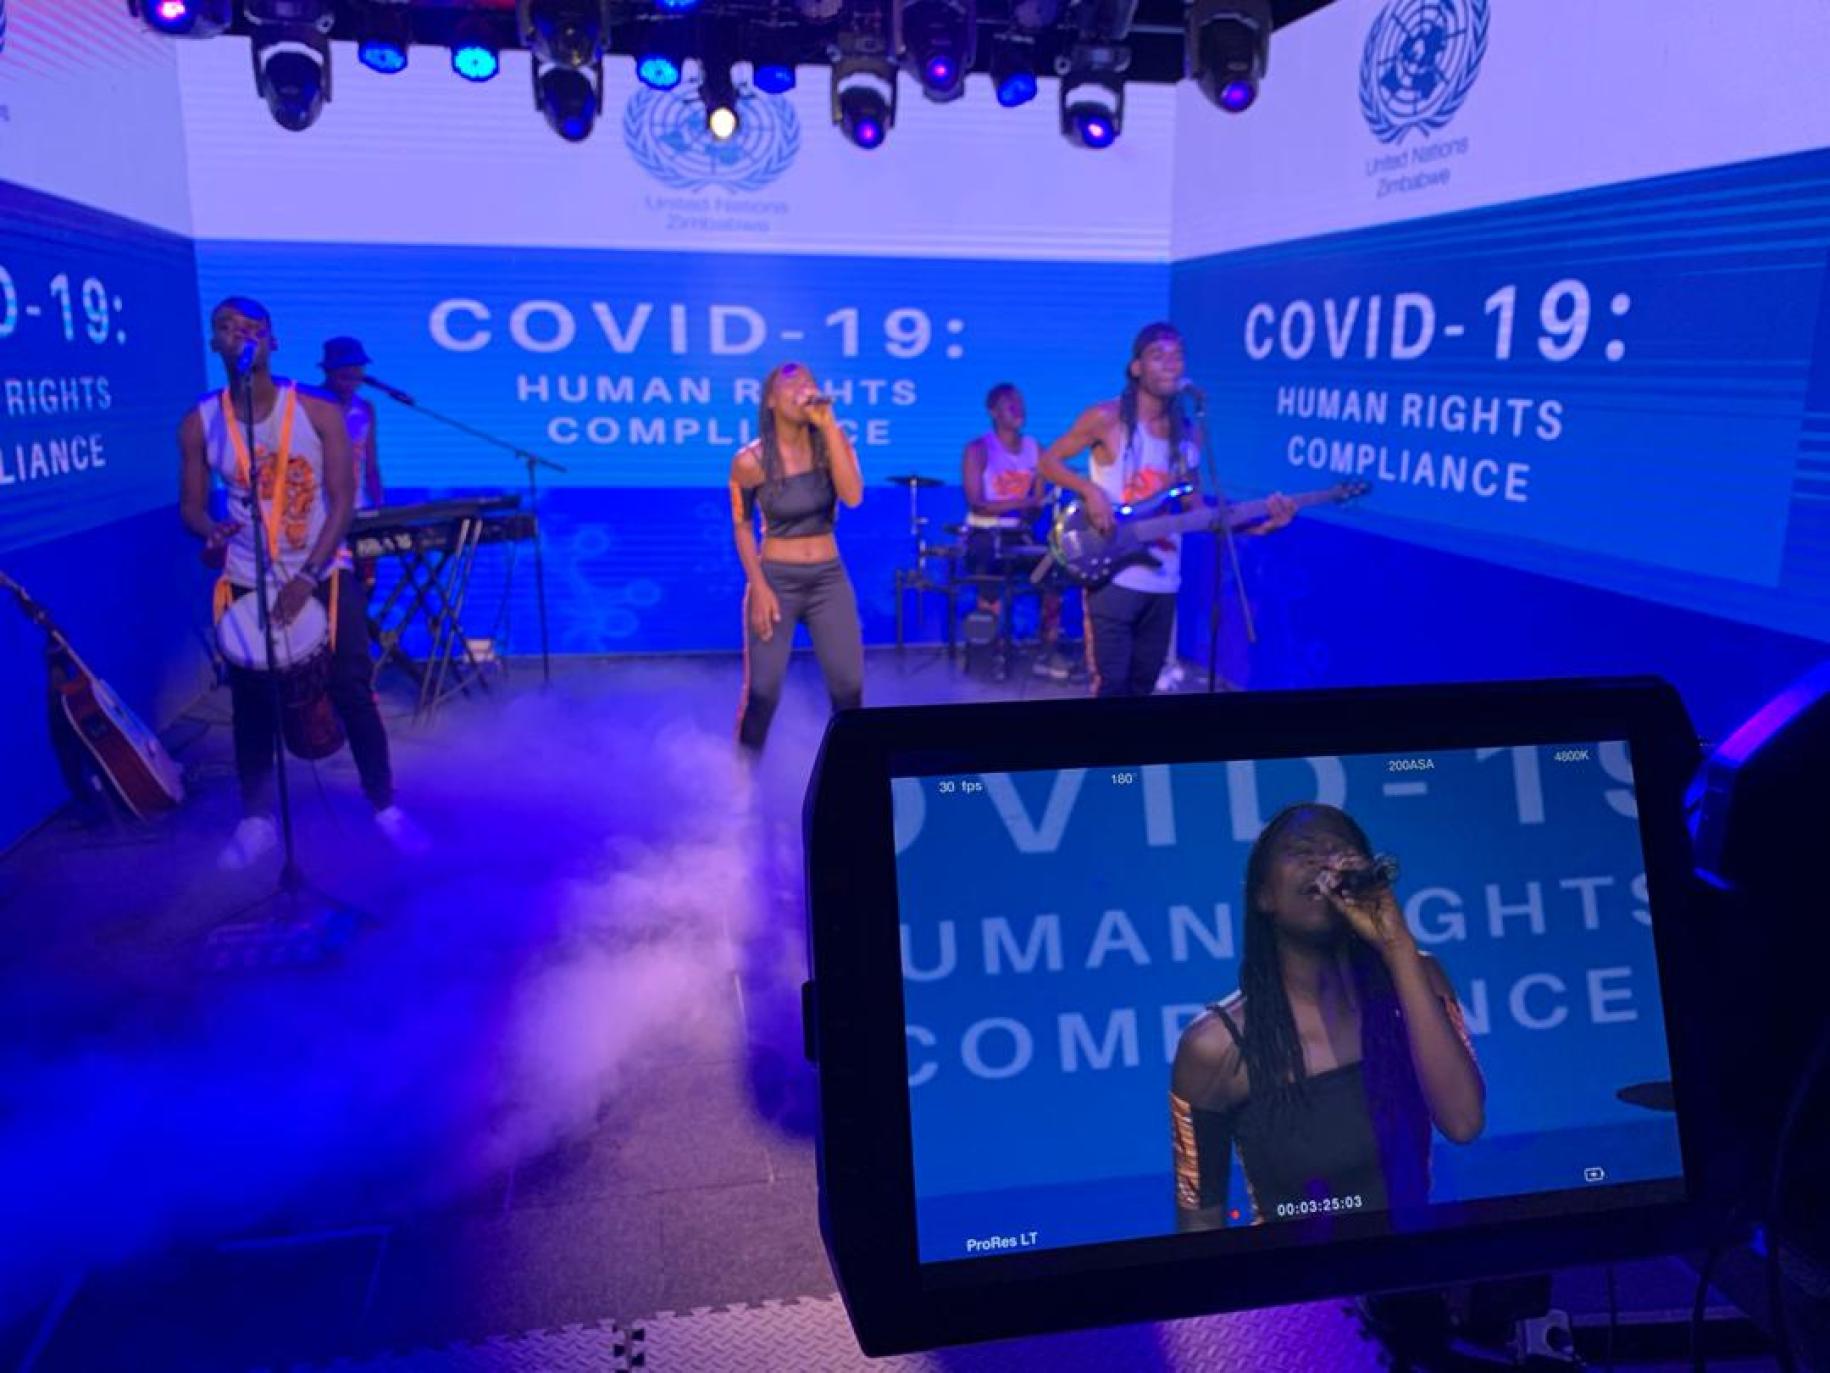 Caroleen Masawi and her band perform surrounded by green screens featuring a COVID-19 message.